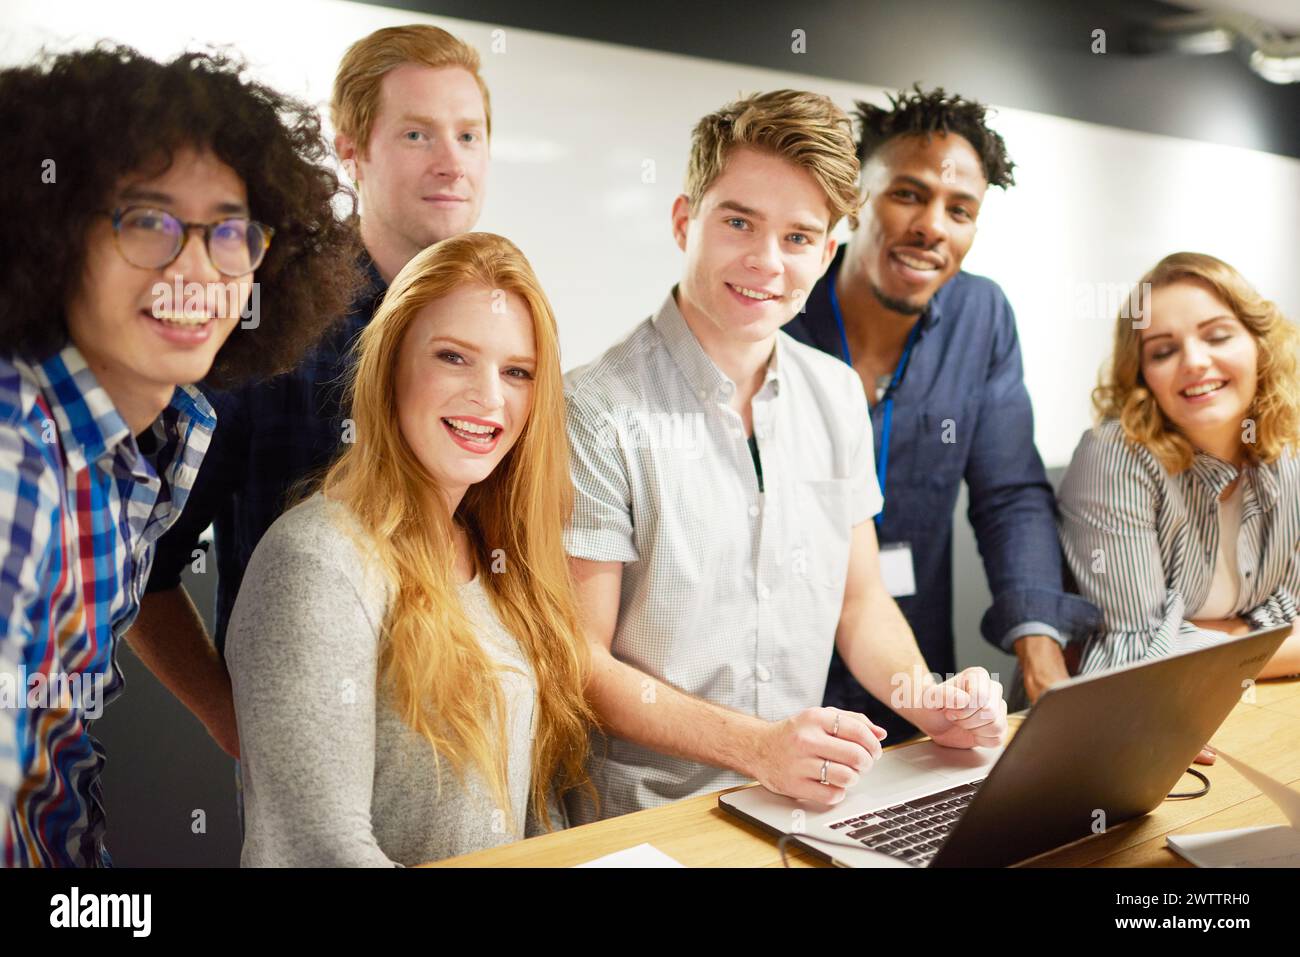 Group of young professionals at a meeting Stock Photo